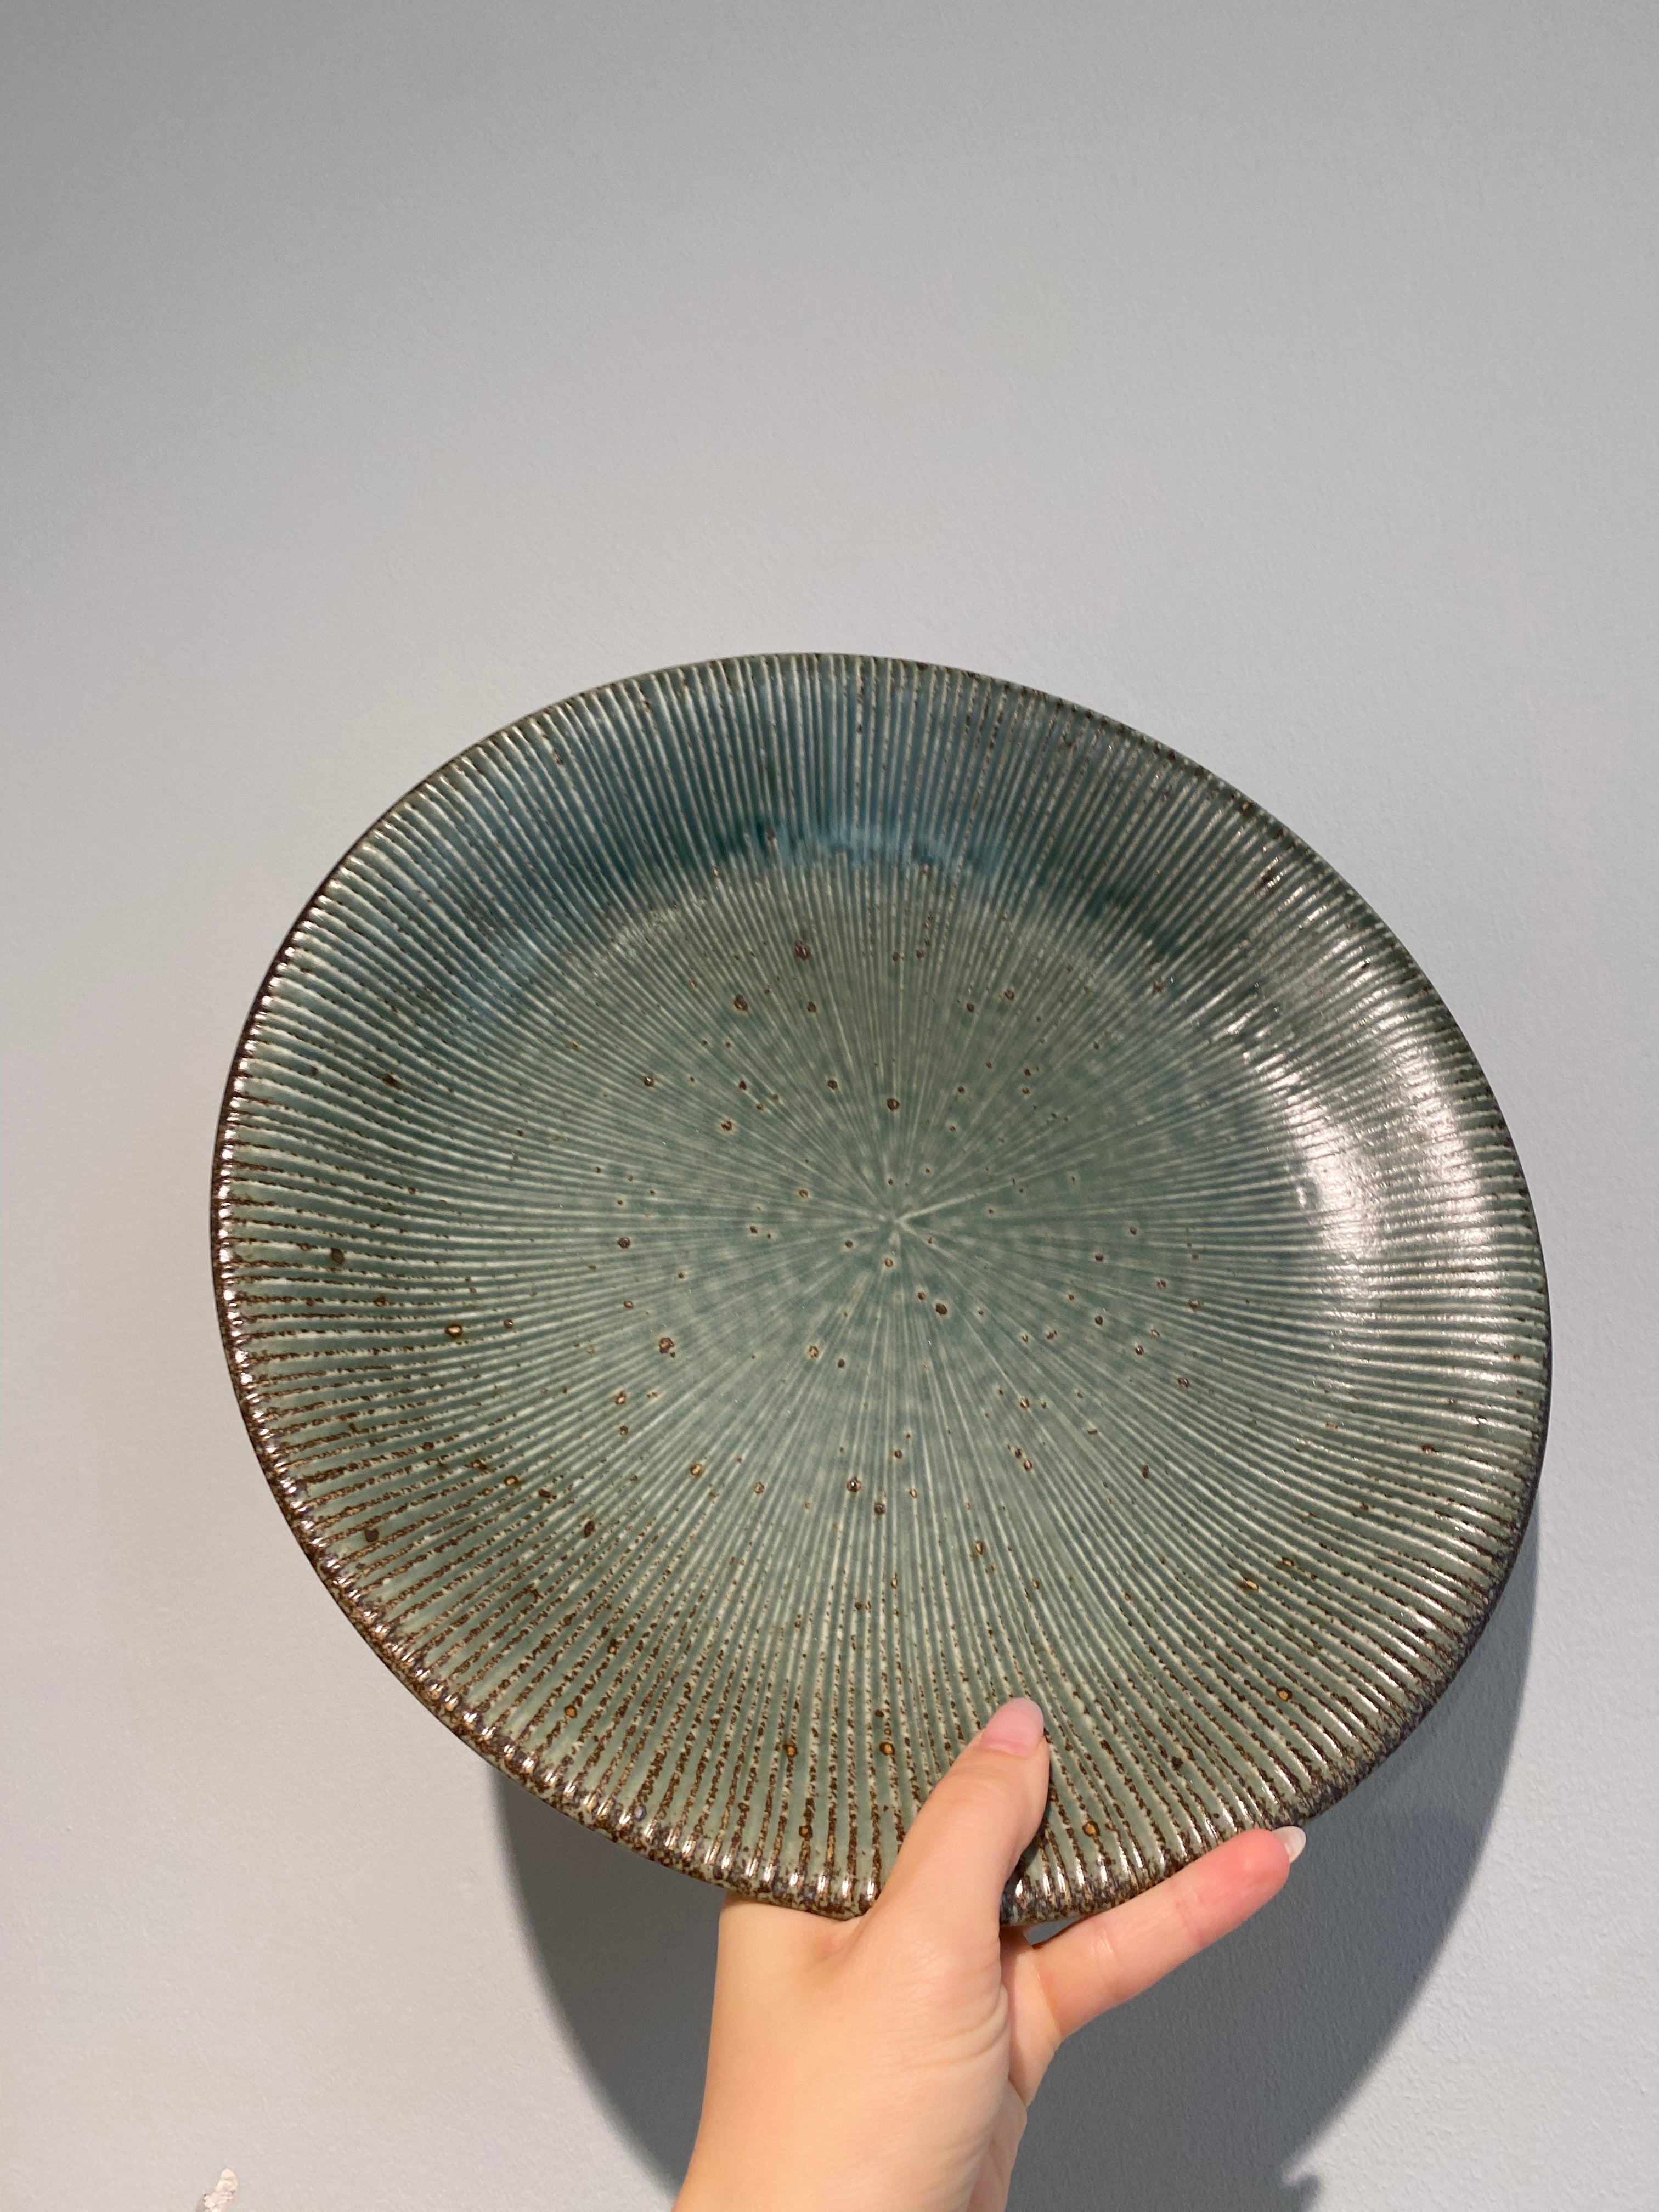 Japanese rustic dish with green glaze